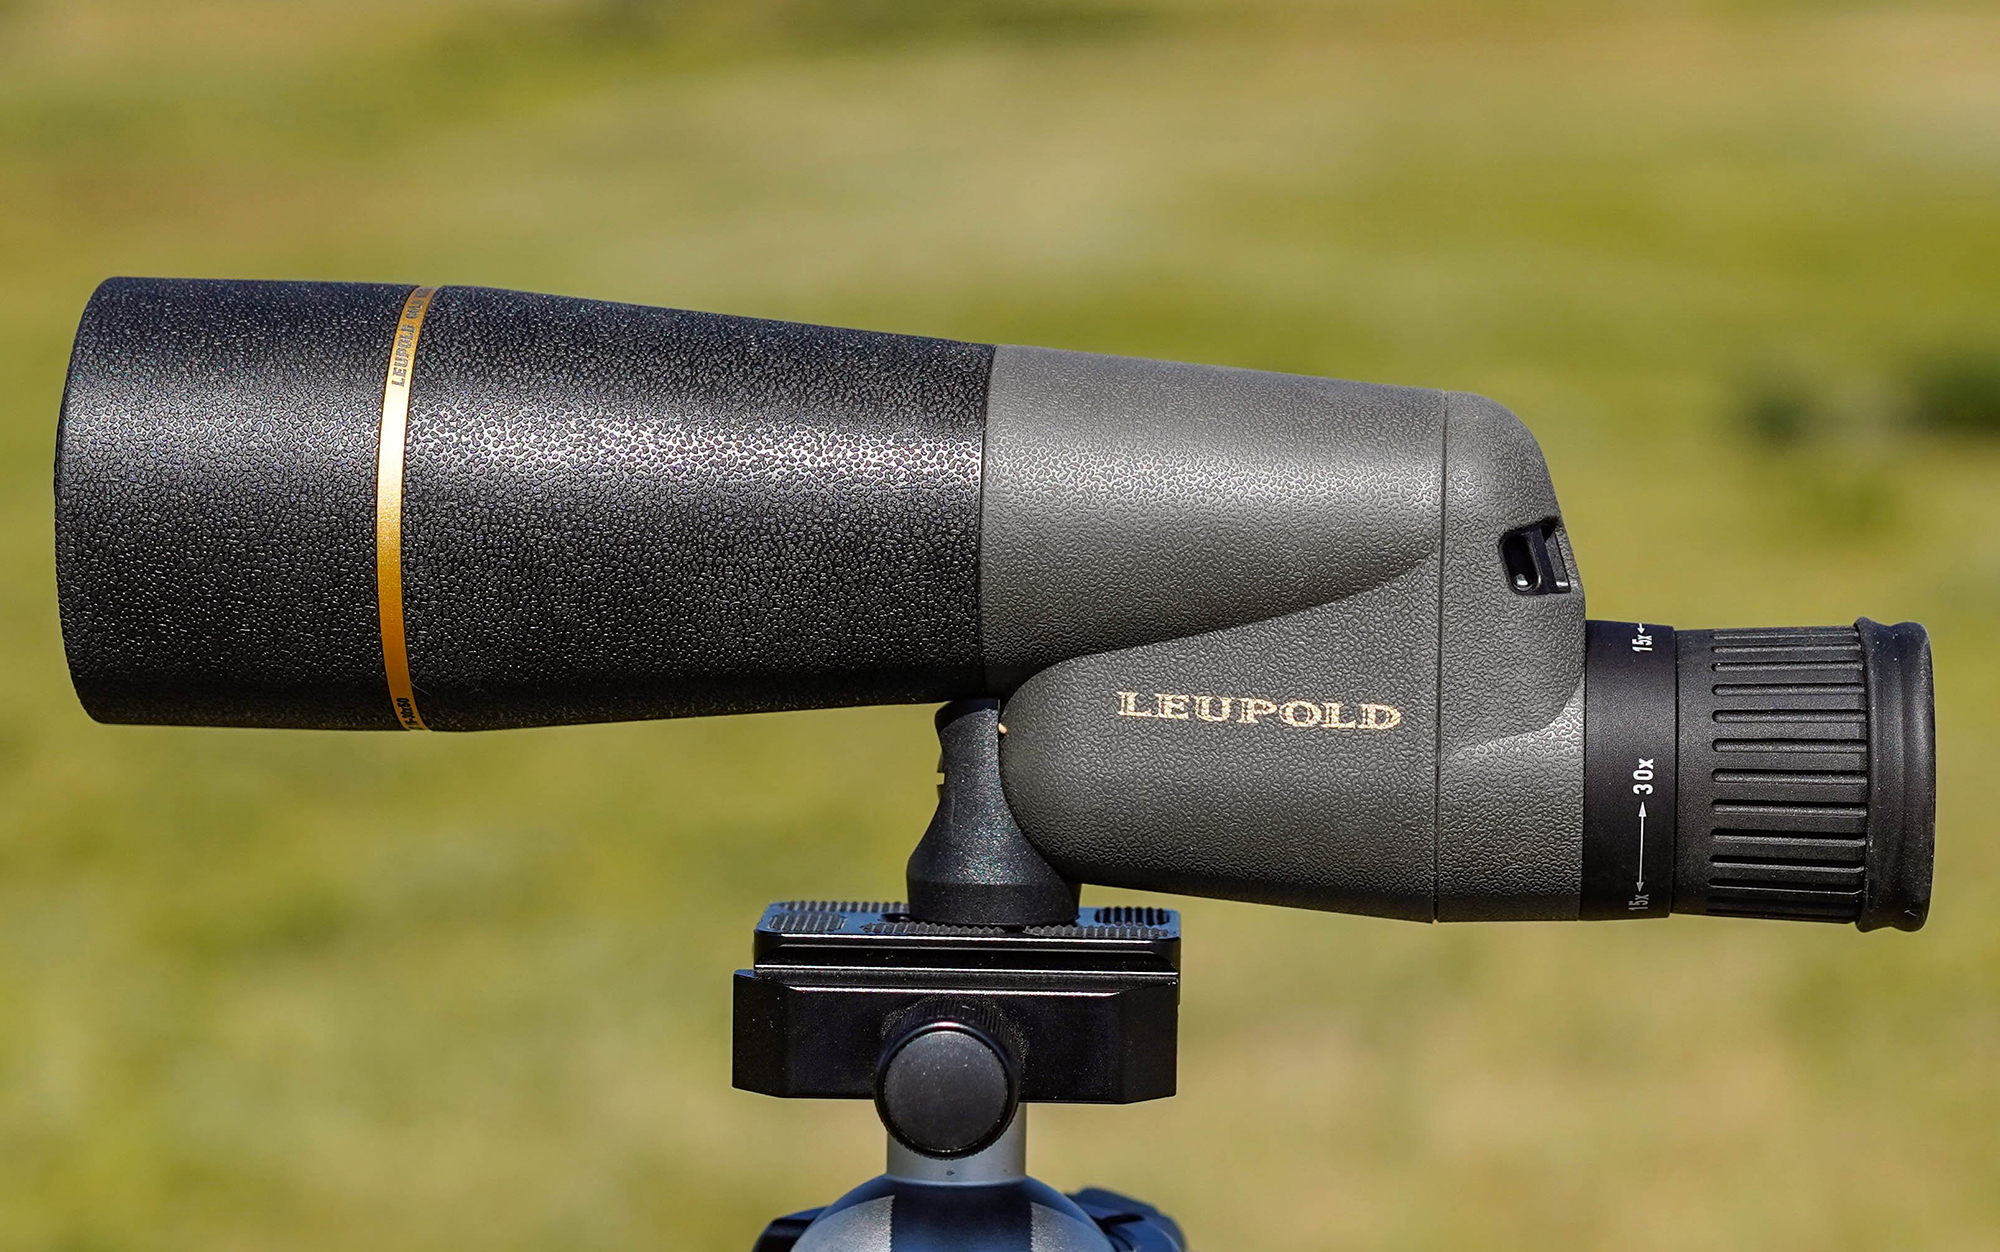 We tested the Leupold Gold Ring Compact 15-30x50.